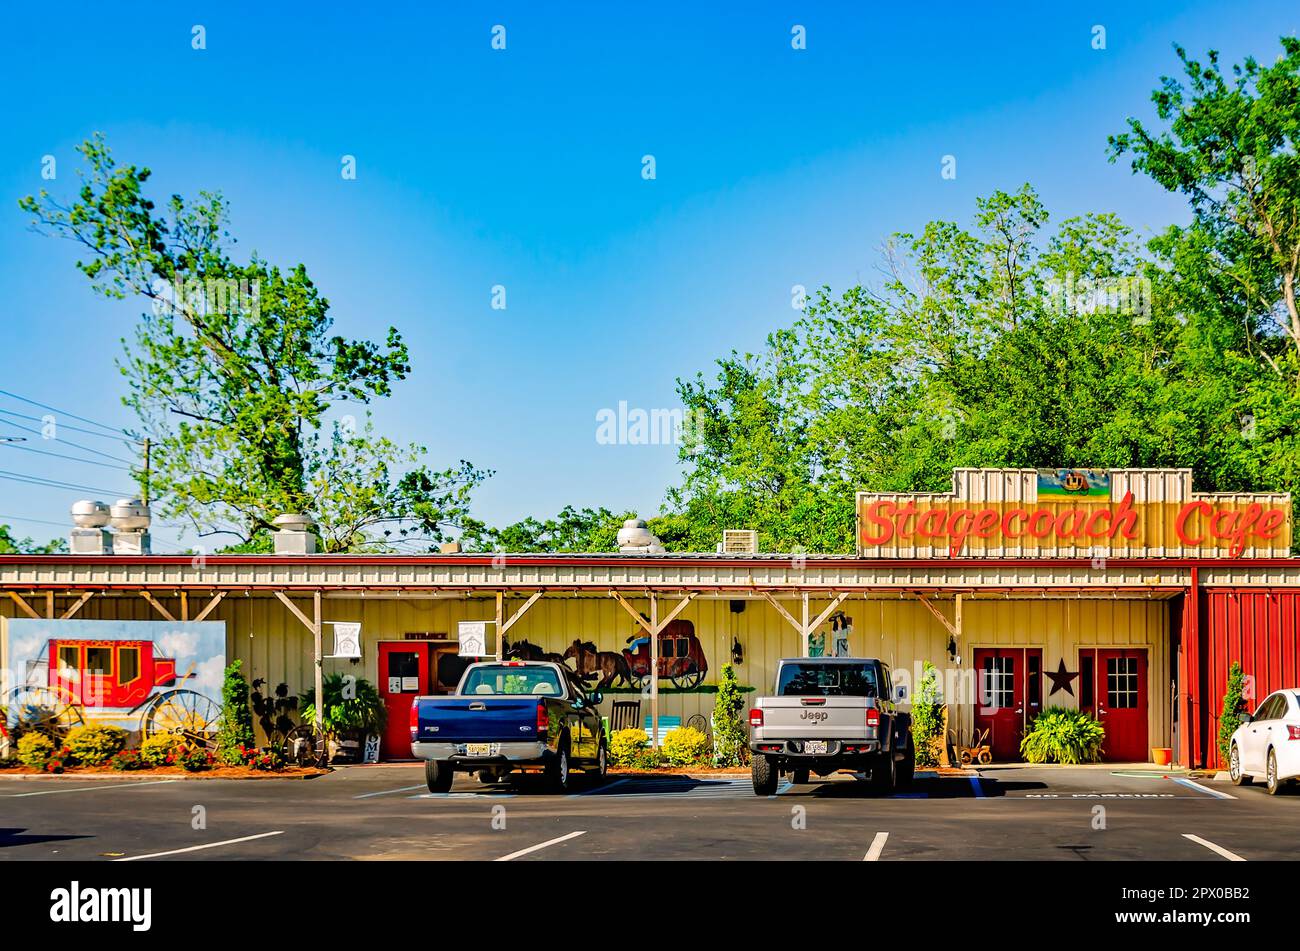 Stagecoach Cafe is pictured, April 22, 2023, in Stockton, Alabama. The restaurant was founded in the 1990s. Stock Photo